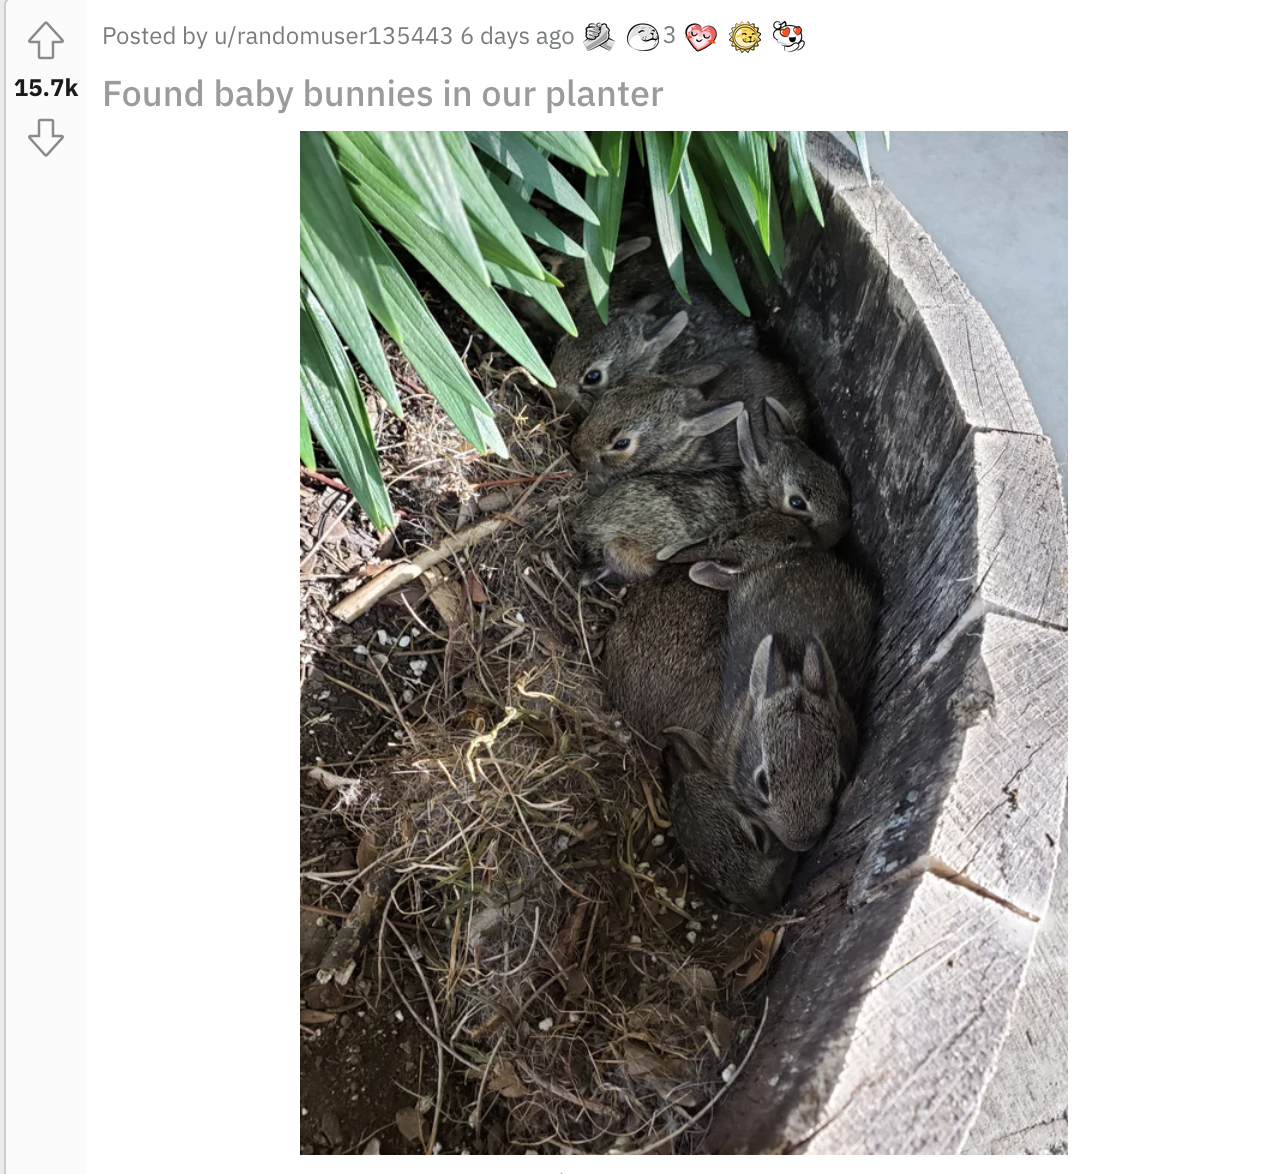 Baby bunnies and an adult bunny found in a planter